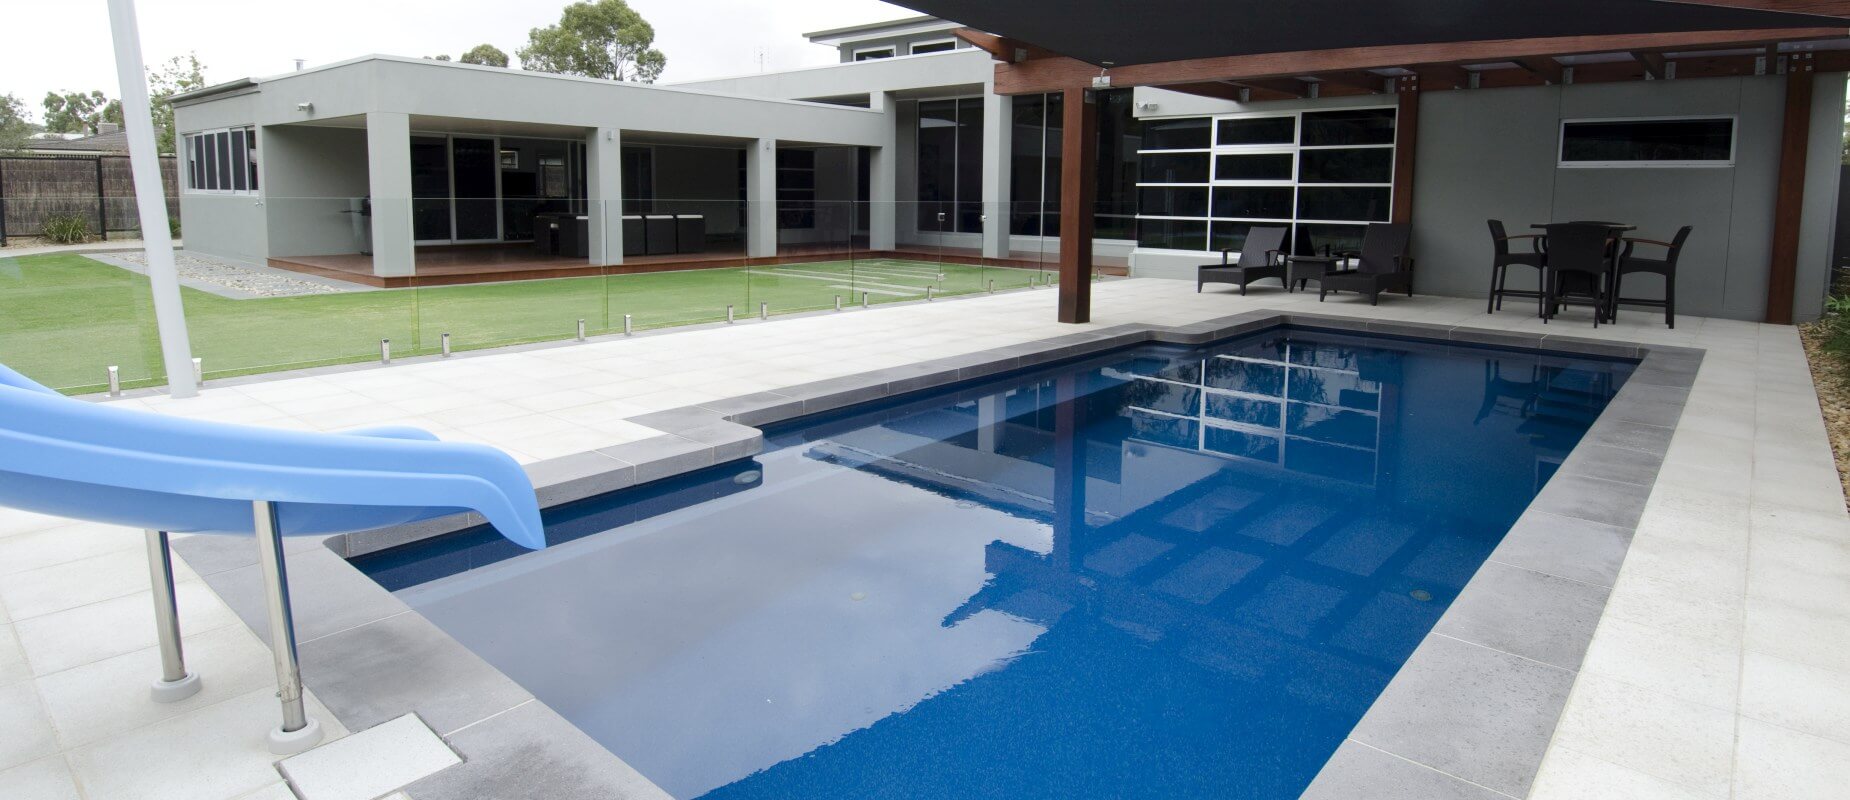 007-Compass-Pools-Australia_Intelligent-Vogue-swimming-pool-with-self-cleaning-and-glass-fencing